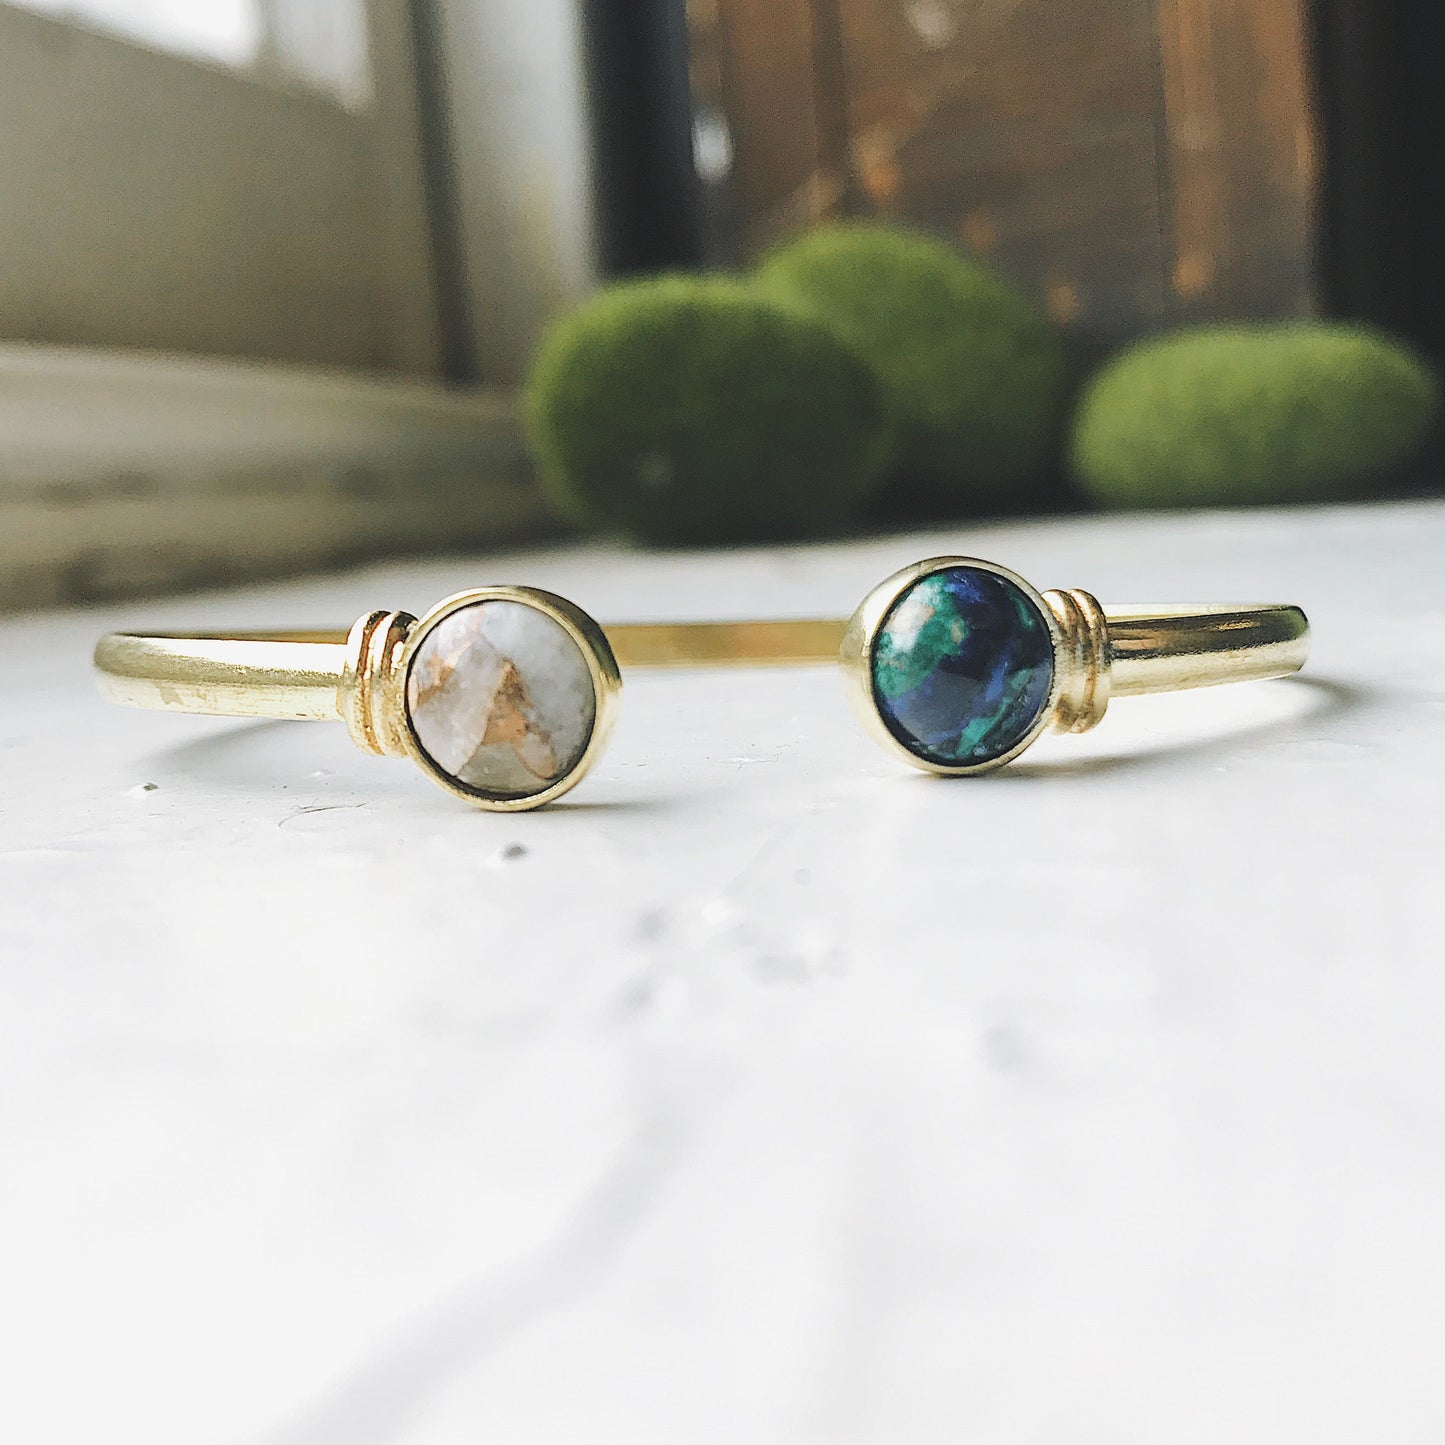 Earth and Moon Cuff Bracelet with Natural Stones